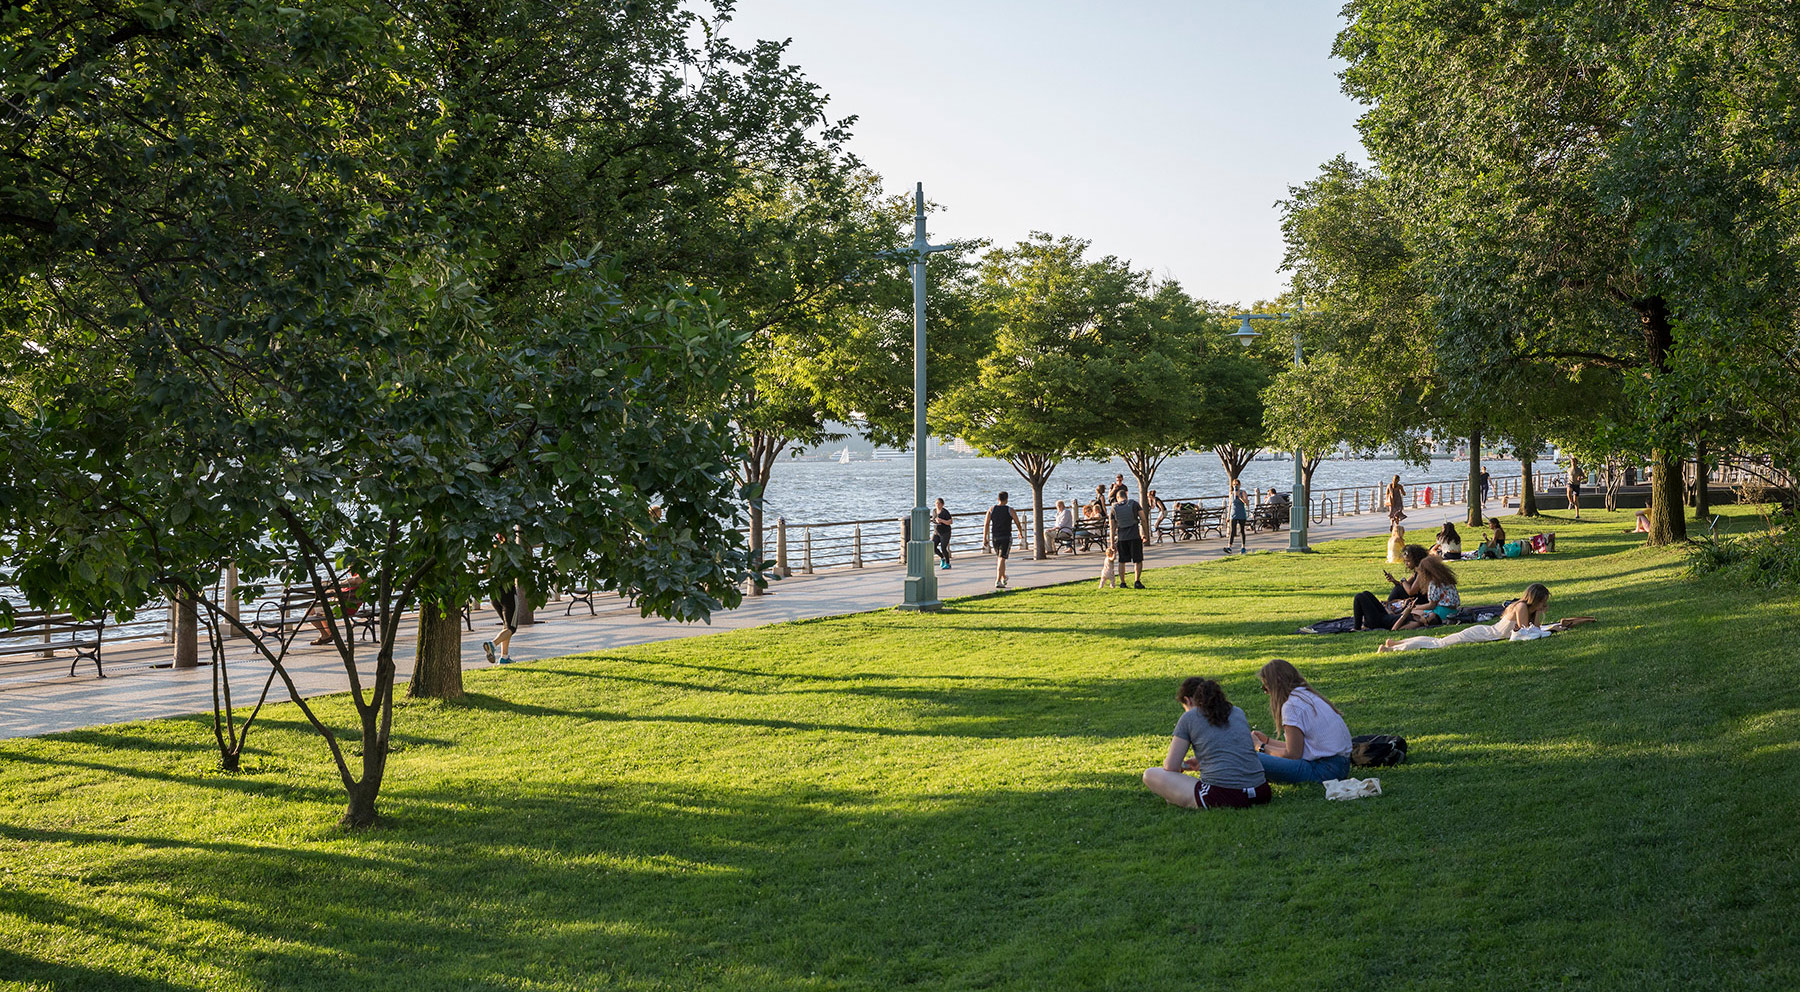 Hudson River Park is the longest riverfront park in the United States—550 acres of athletic and nautical activities